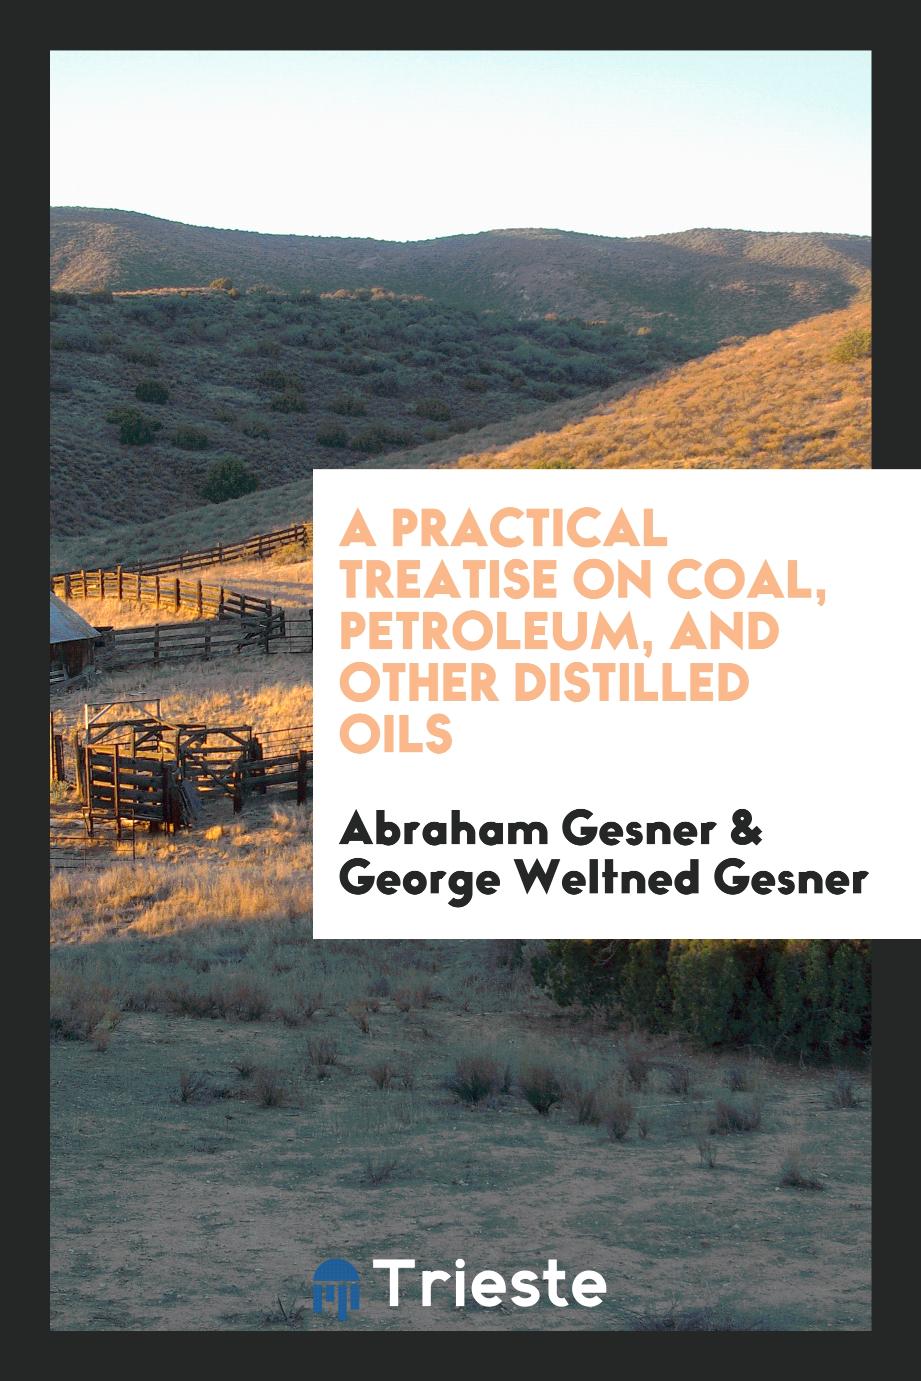 A practical treatise on coal, petroleum, and other distilled oils